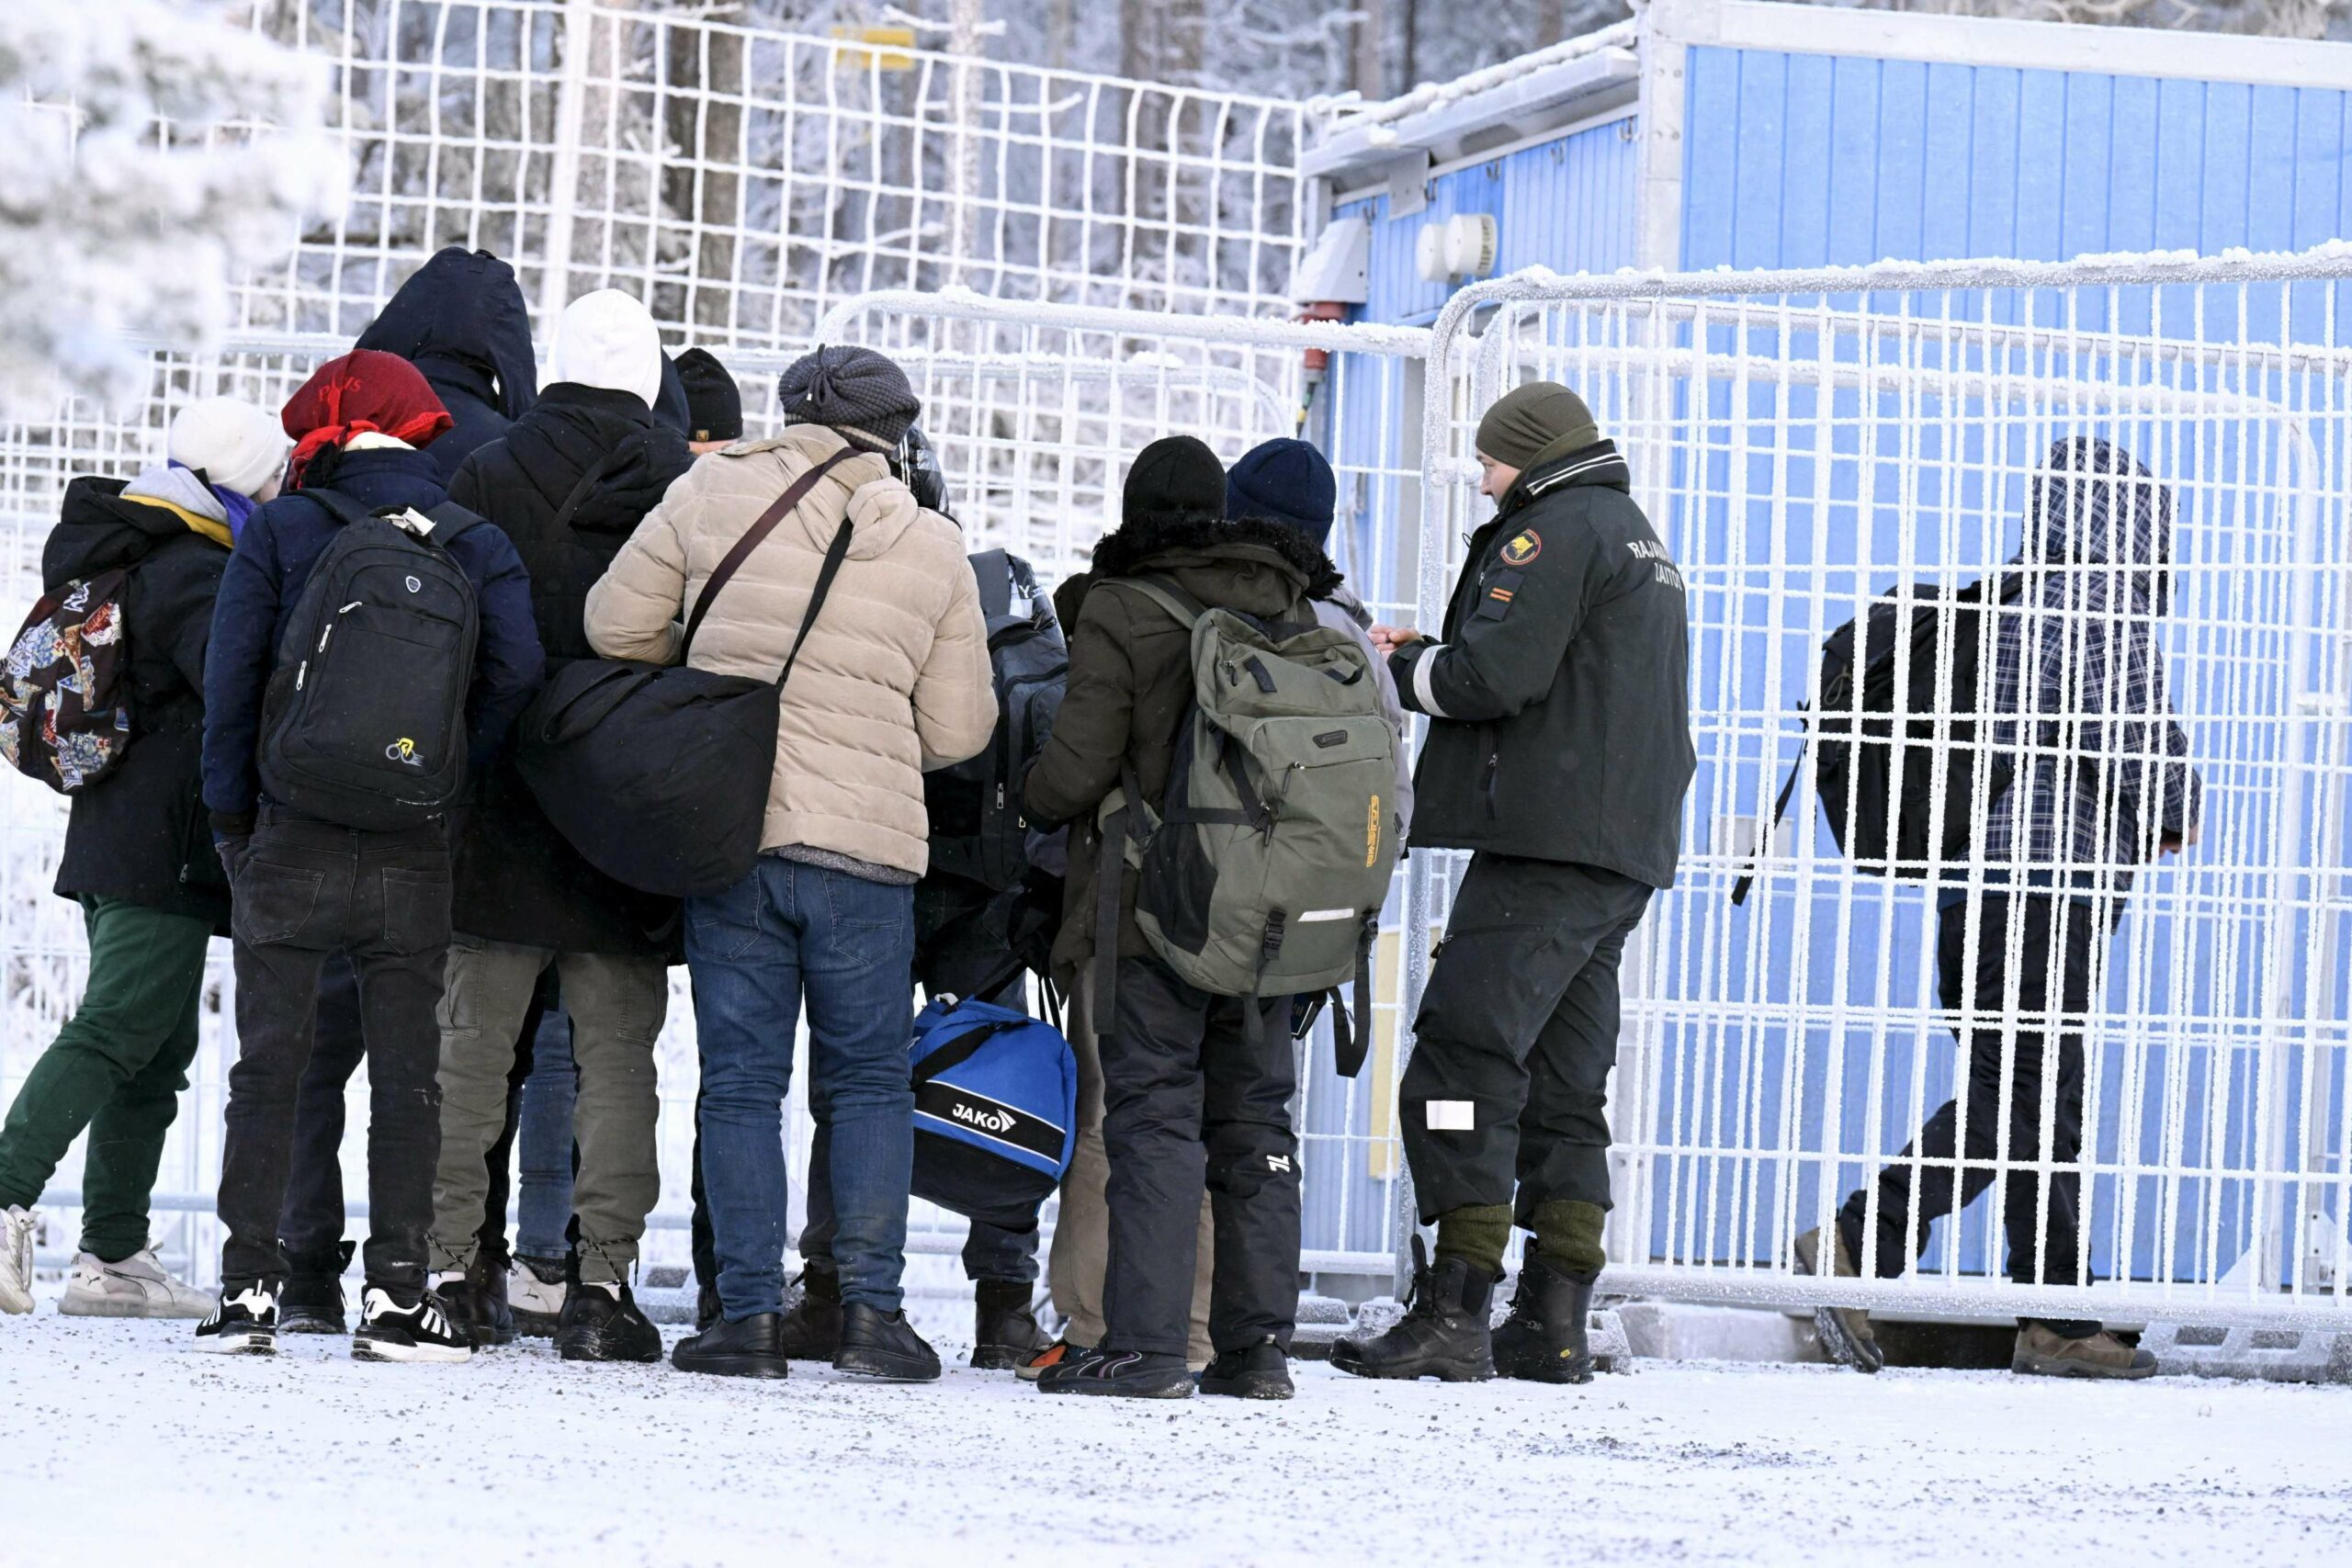 Finnish Border Guards check the documents of arriving migrants at the international border crossing at Salla, northern Finland